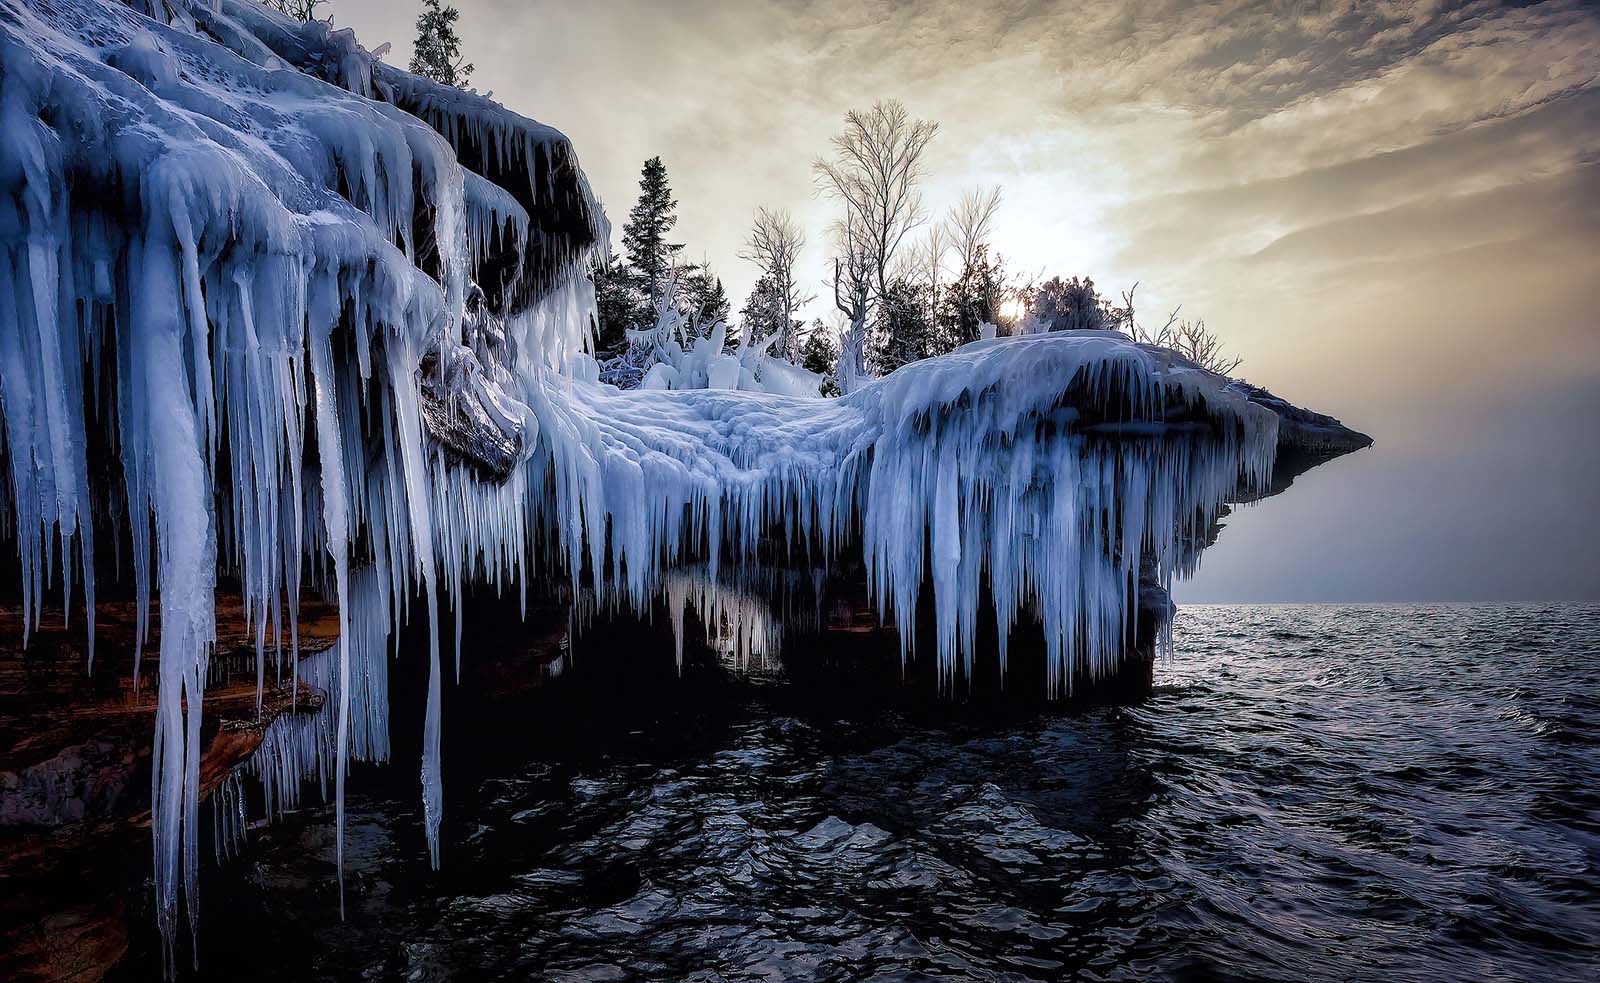 ice caves on devil's island in the apostle islands national lakeshore on lake superior wisconsin